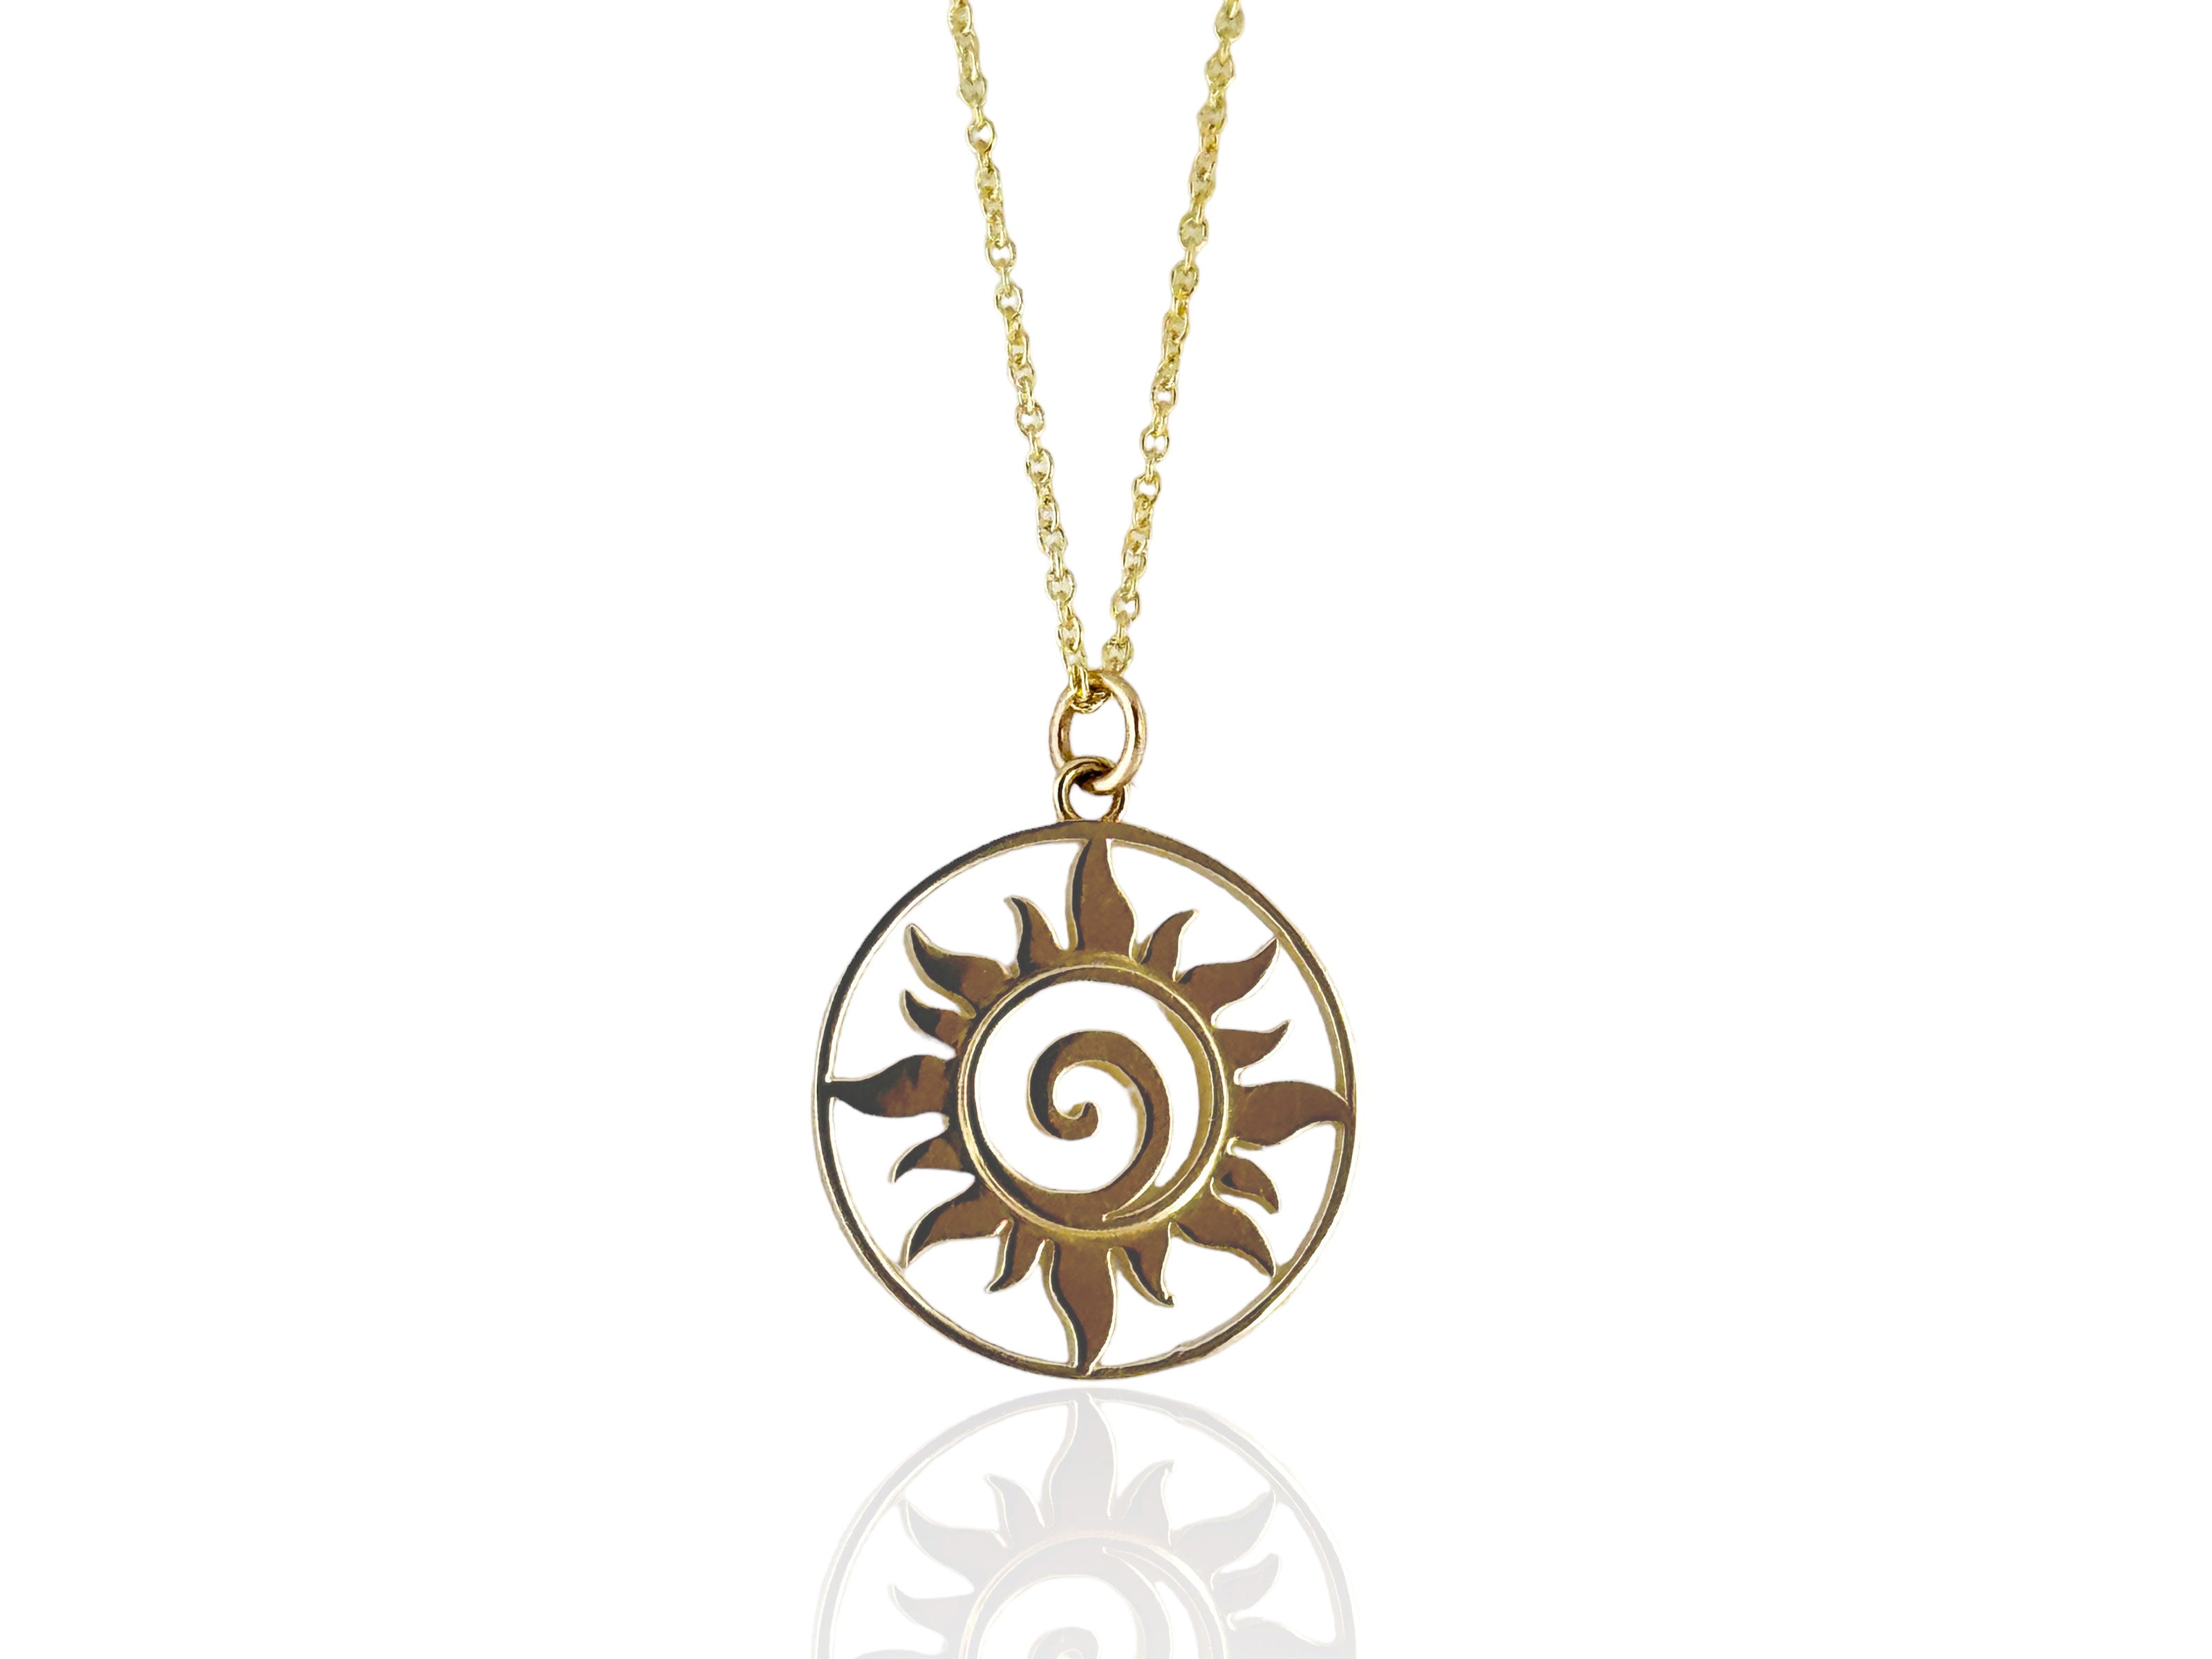 Starburst Diamond Pendant and 14K Gold necklace – M. Lowe and Co.